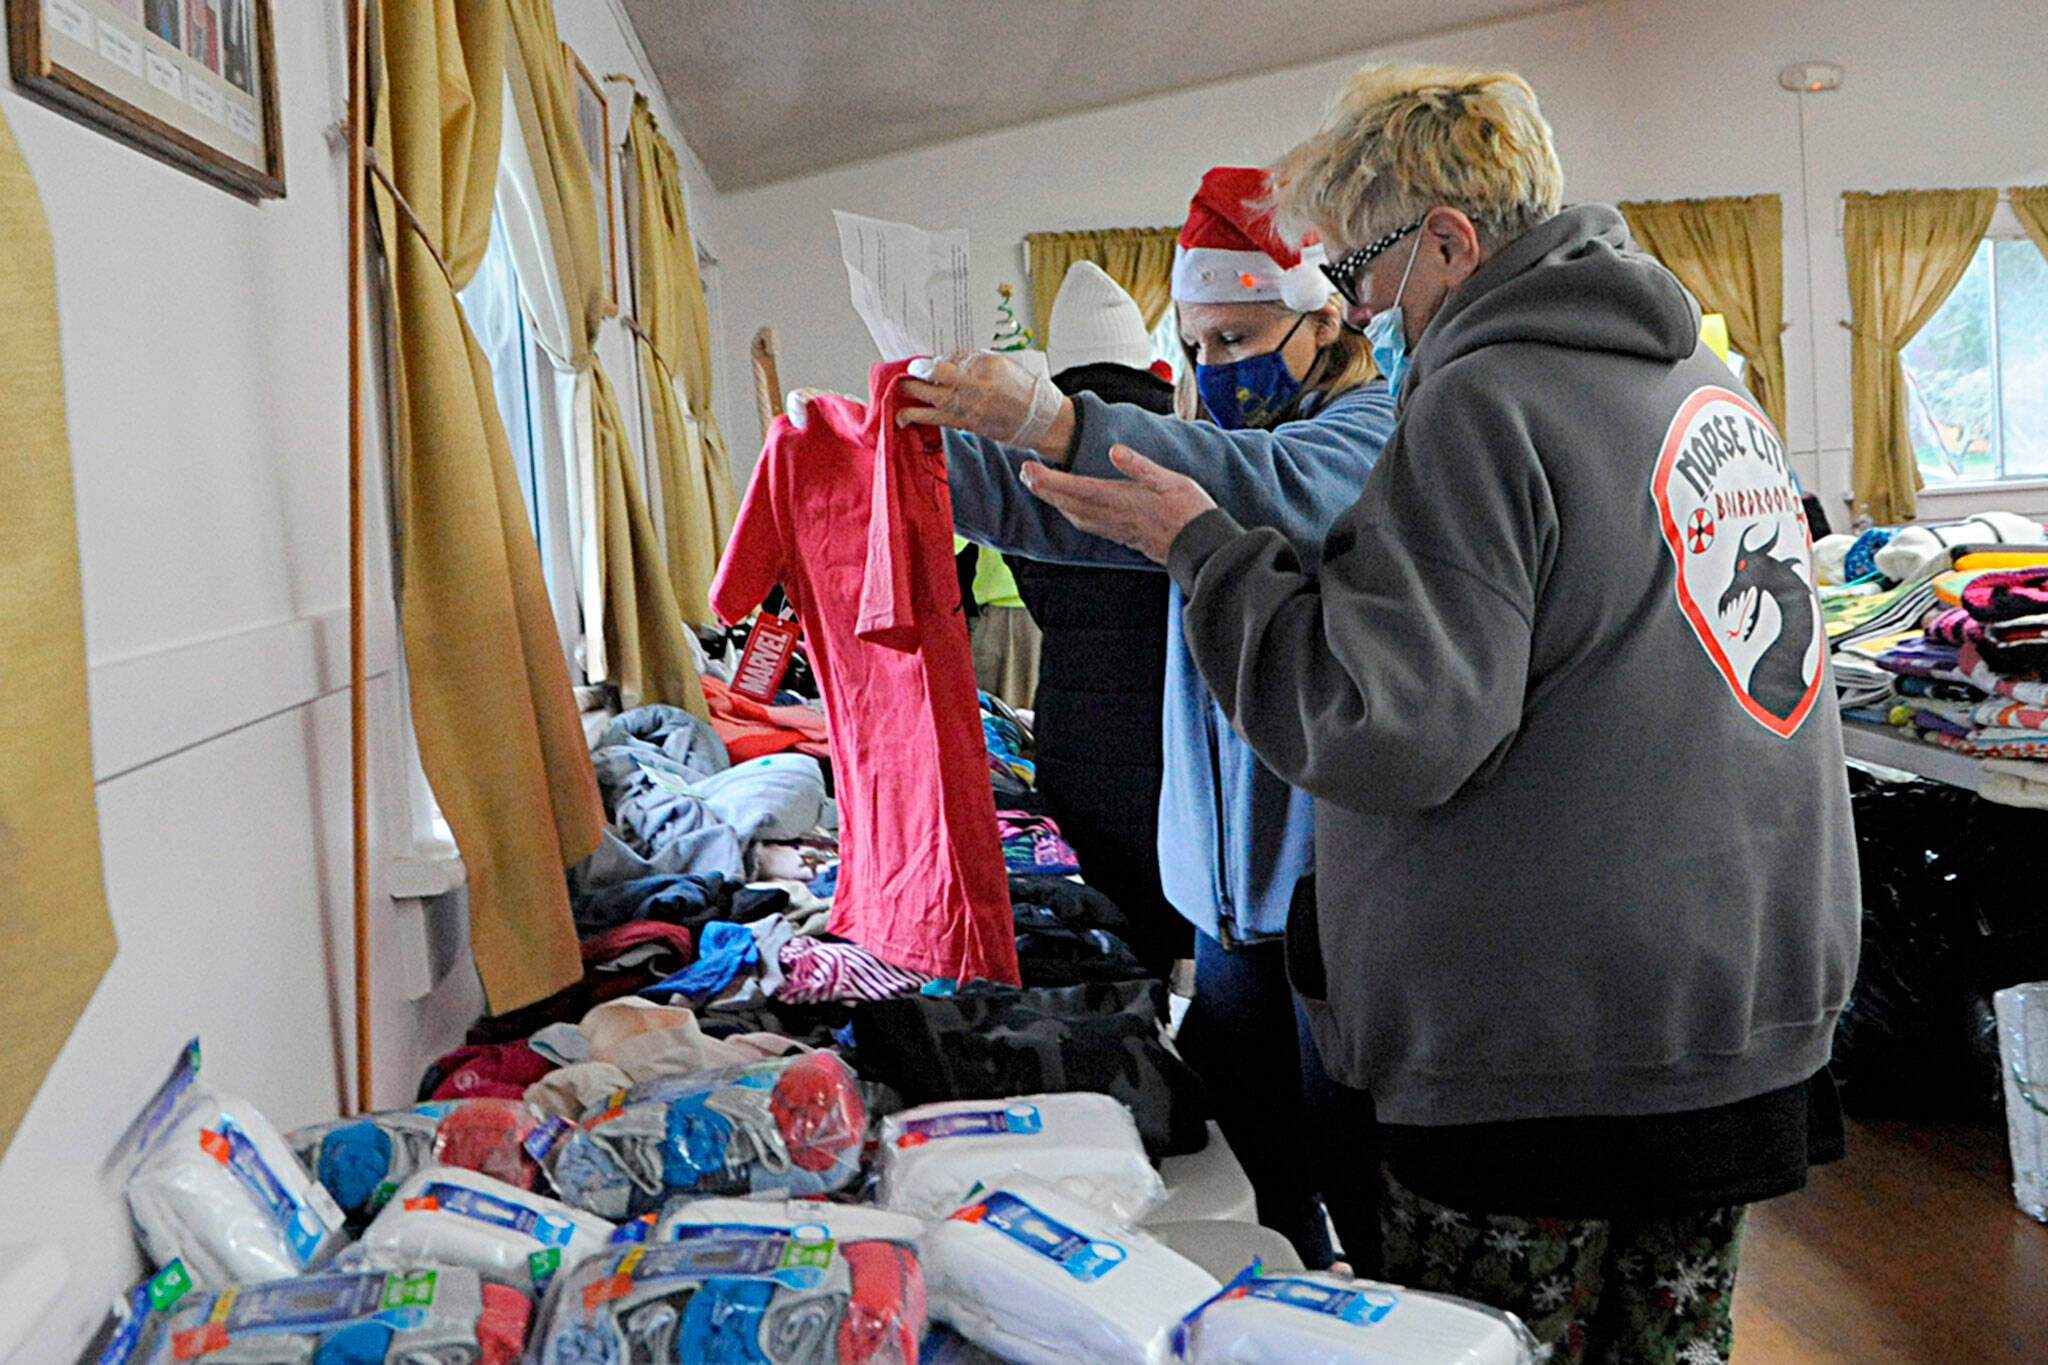 Matthew Nash/Sequim Gazette file photo
Kathy Joyner, co-organizer of Toys for Sequim Kids, helps Jean Ann Houk size up a t-shirt for one of her children at the 2021 event in Sequim Prairie Grange. This year’s event is set for 10 a.m.-6 p.m. Dec. 14.